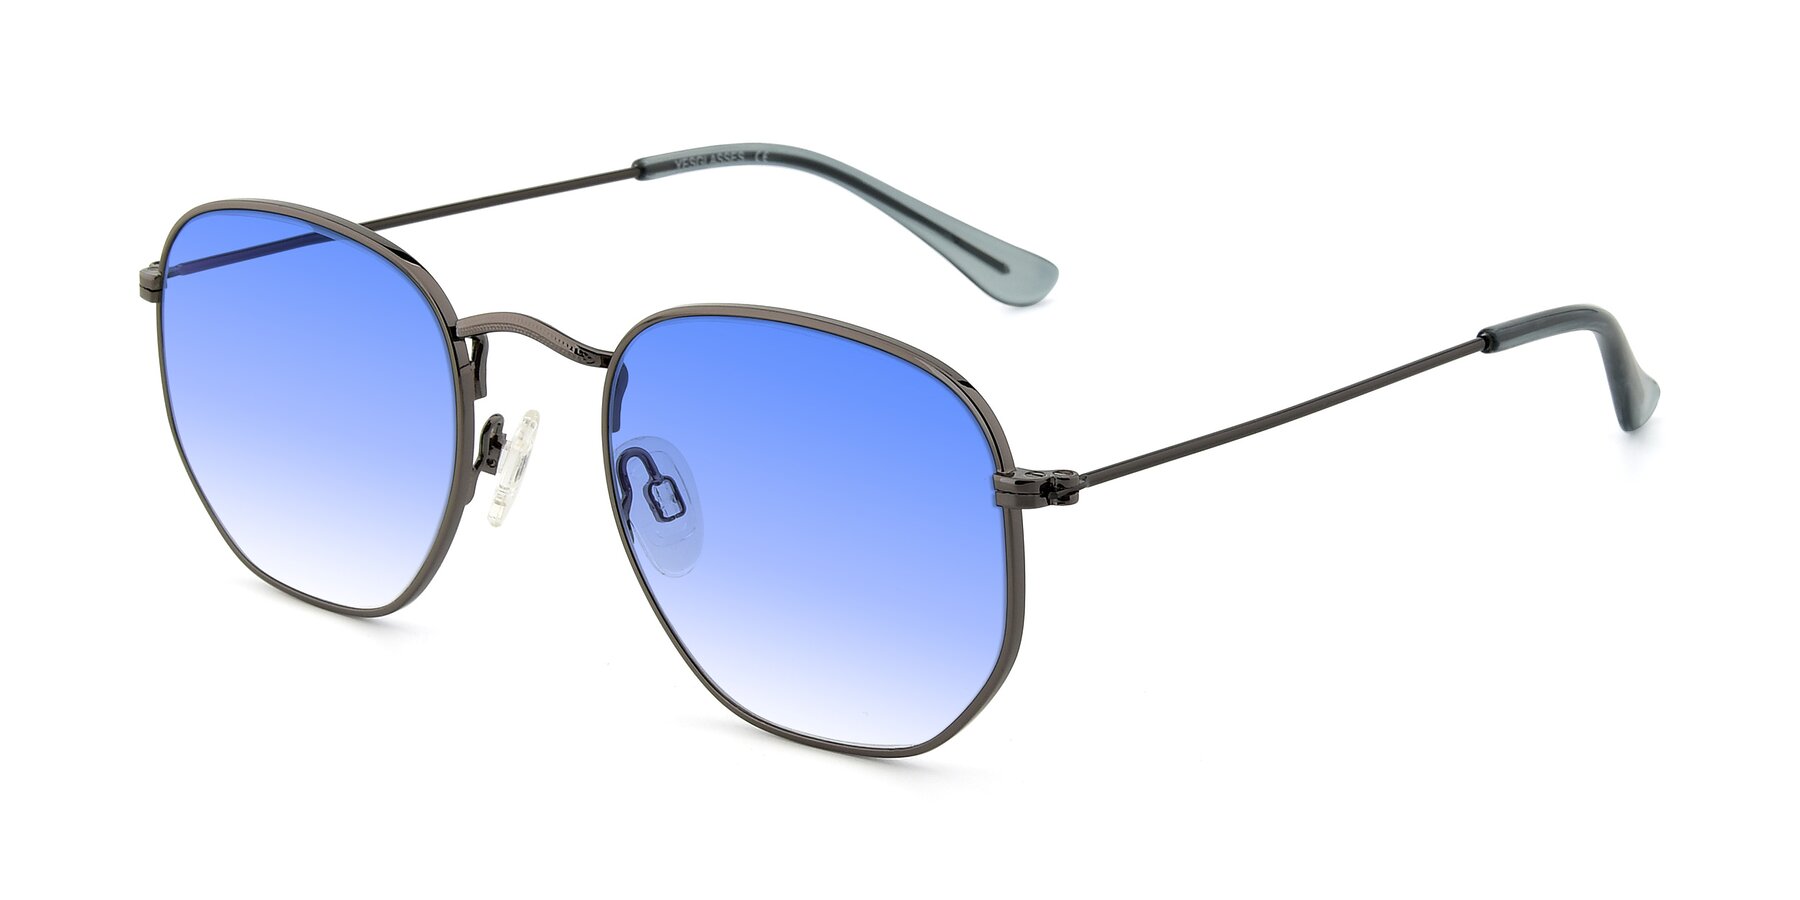 Angle of SSR1944 in Grey with Blue Gradient Lenses